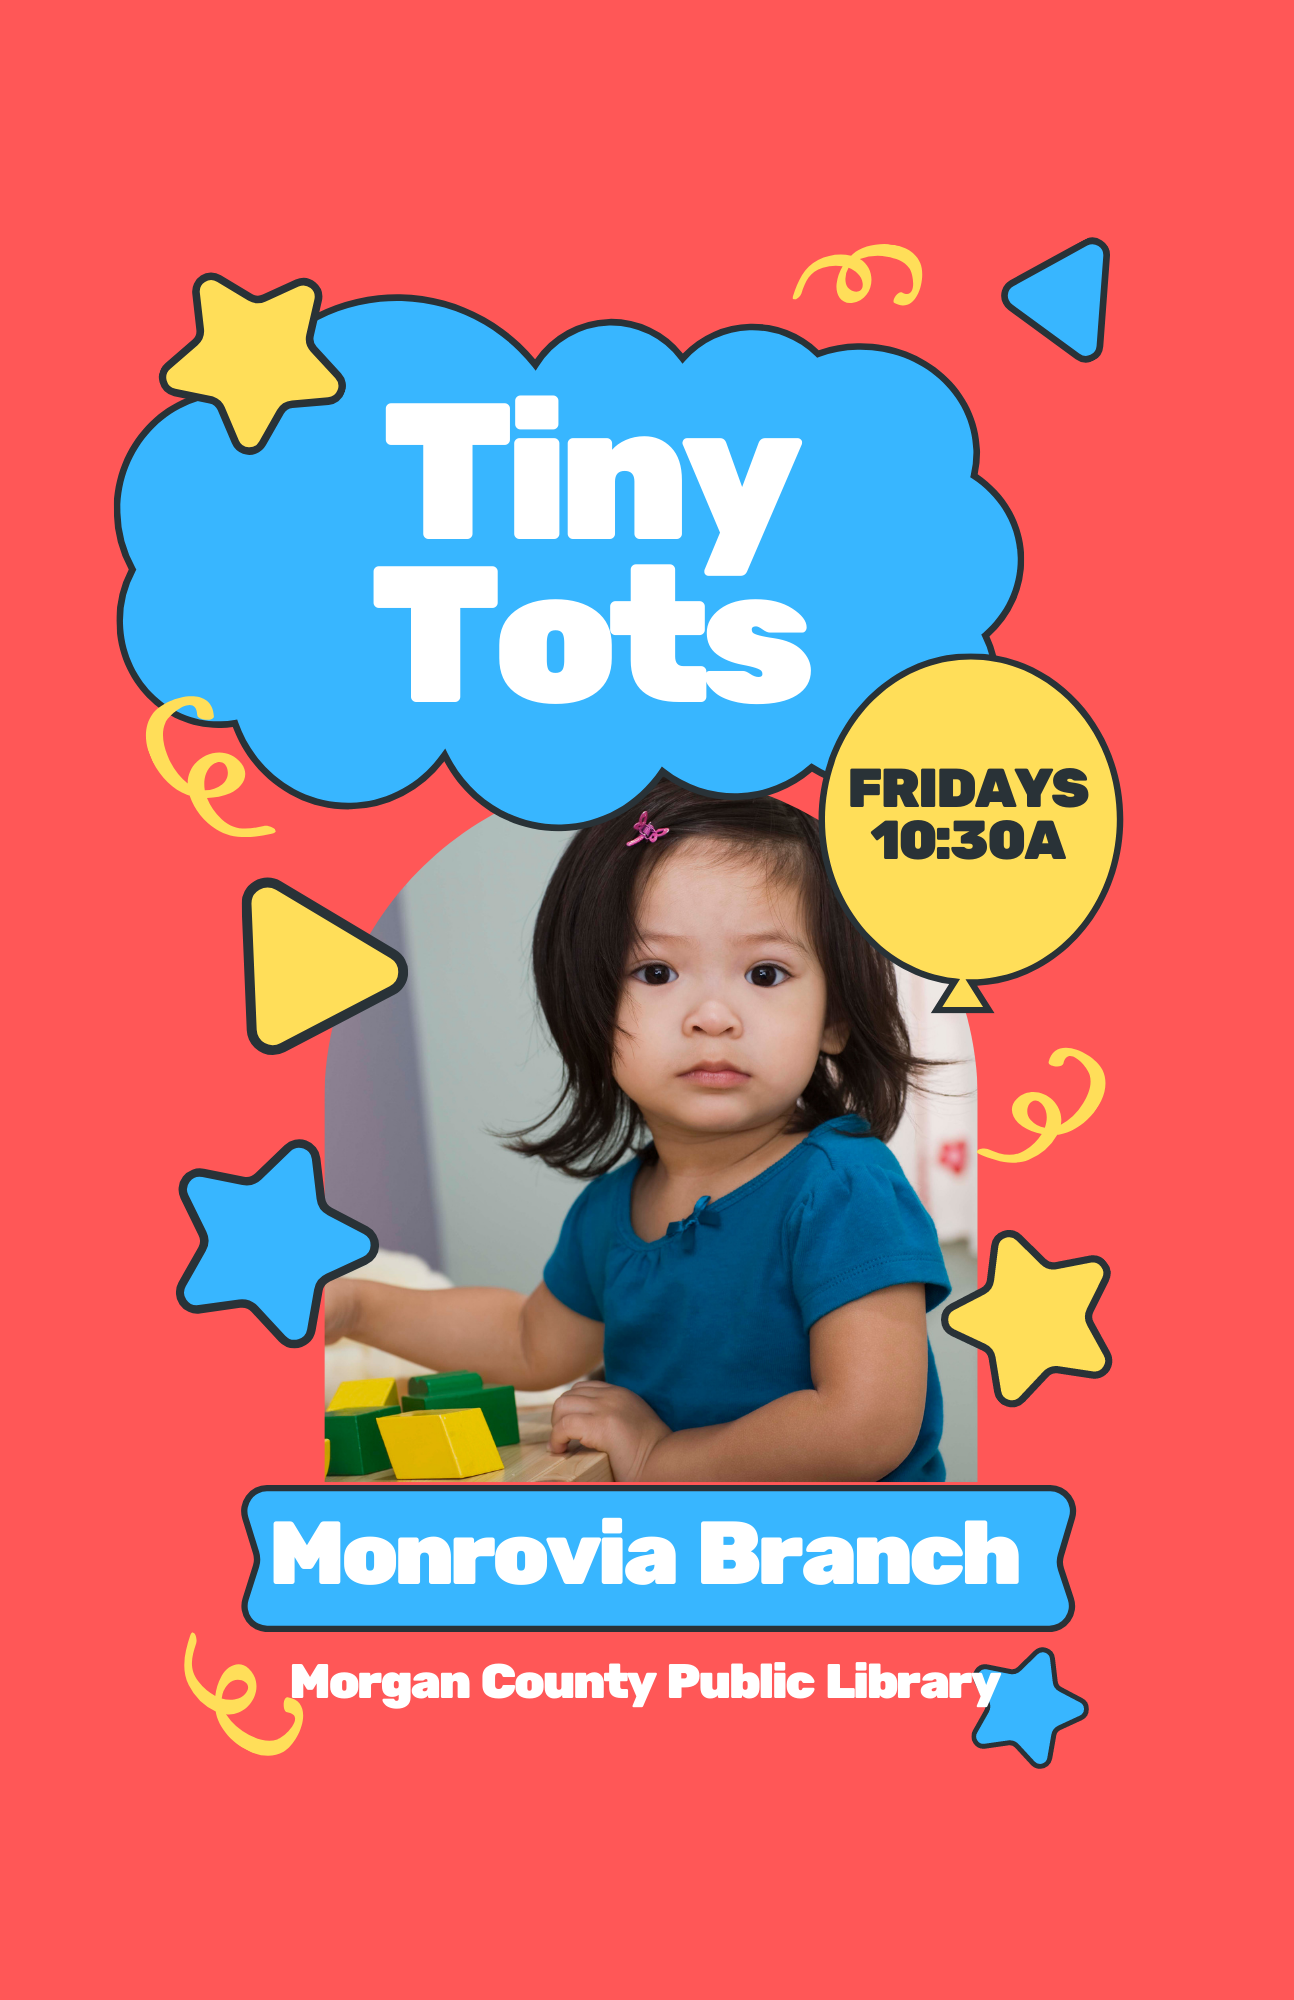 coral background with light blue and yellow cloud and shapes.  Text:  tiny tots; Fridays 10:30a; Monrovia Branch; Morgan County Public Library